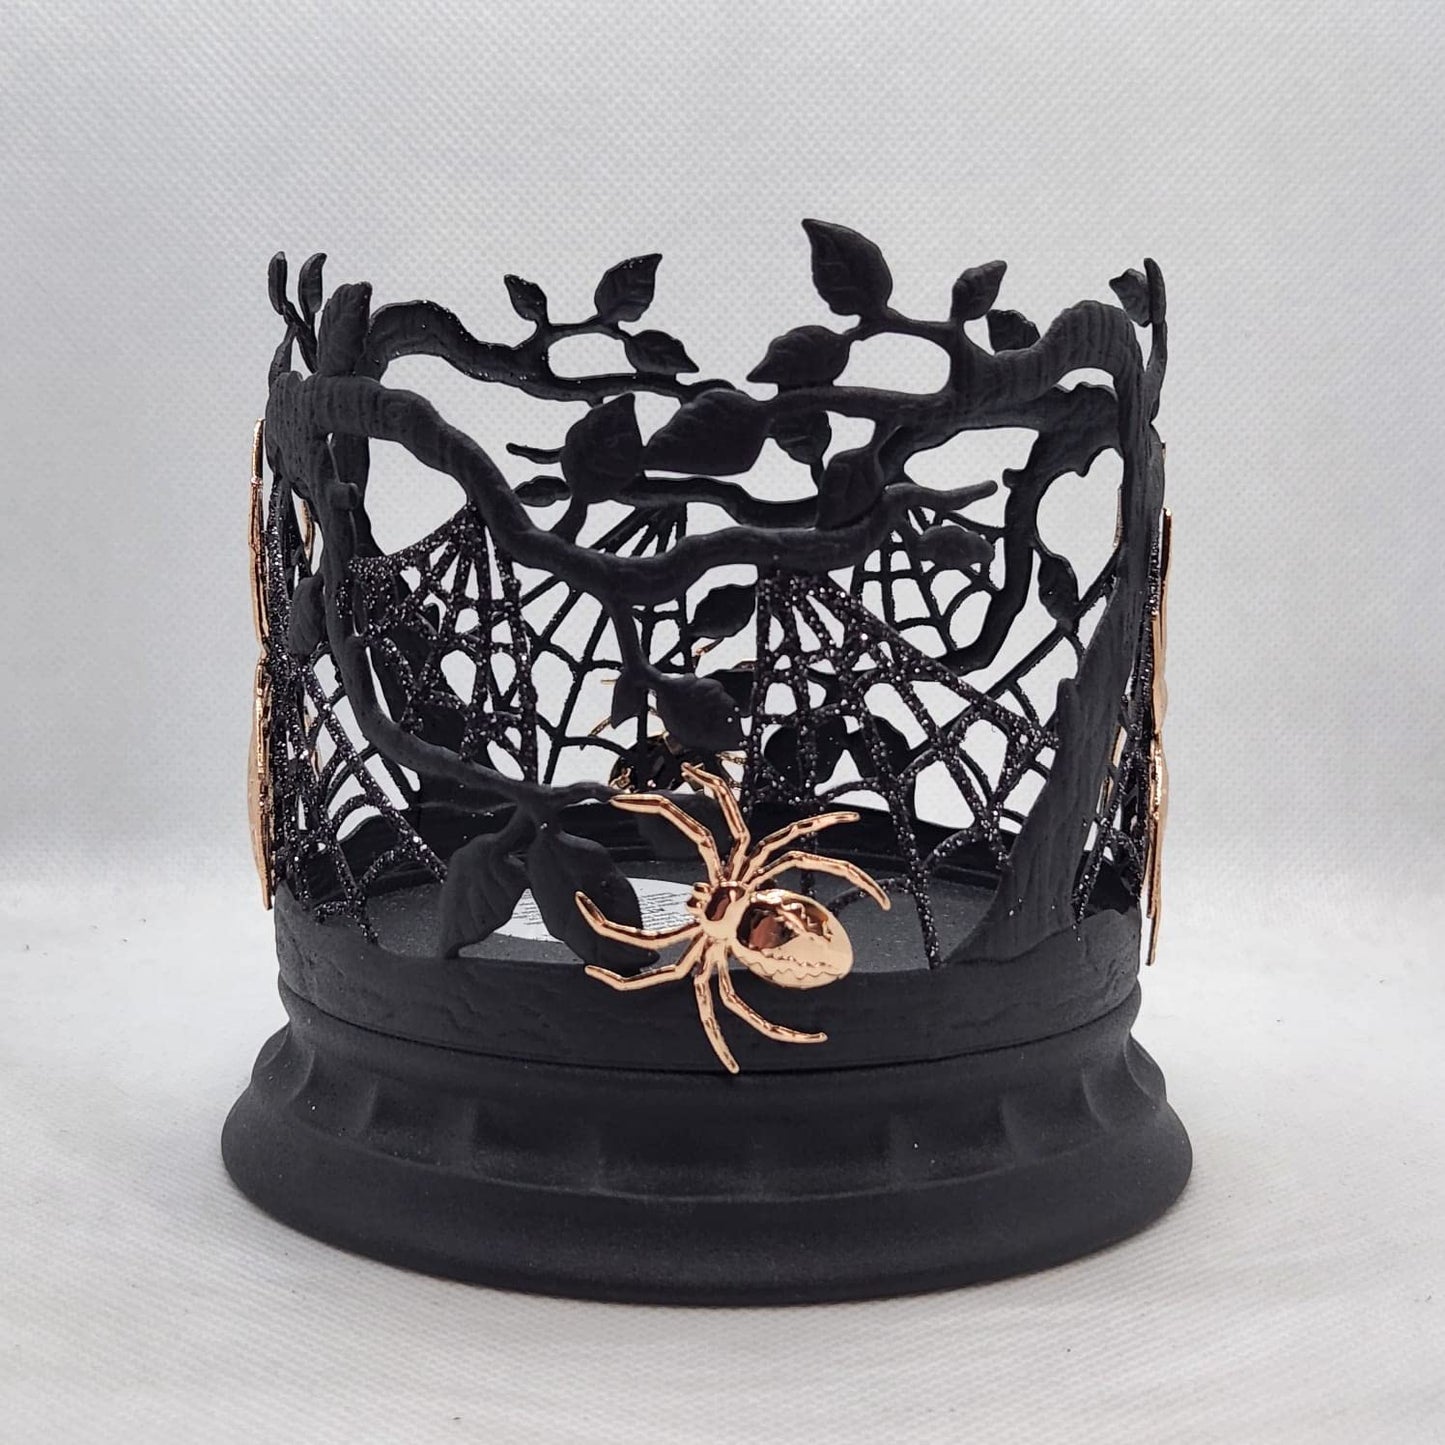 Halloween Candle Holder Compatible with Bath & Body Works and White Barn 3-Wick Candles - Select Your Favorite! (Candle NOT Included) - Spider Branches with Base